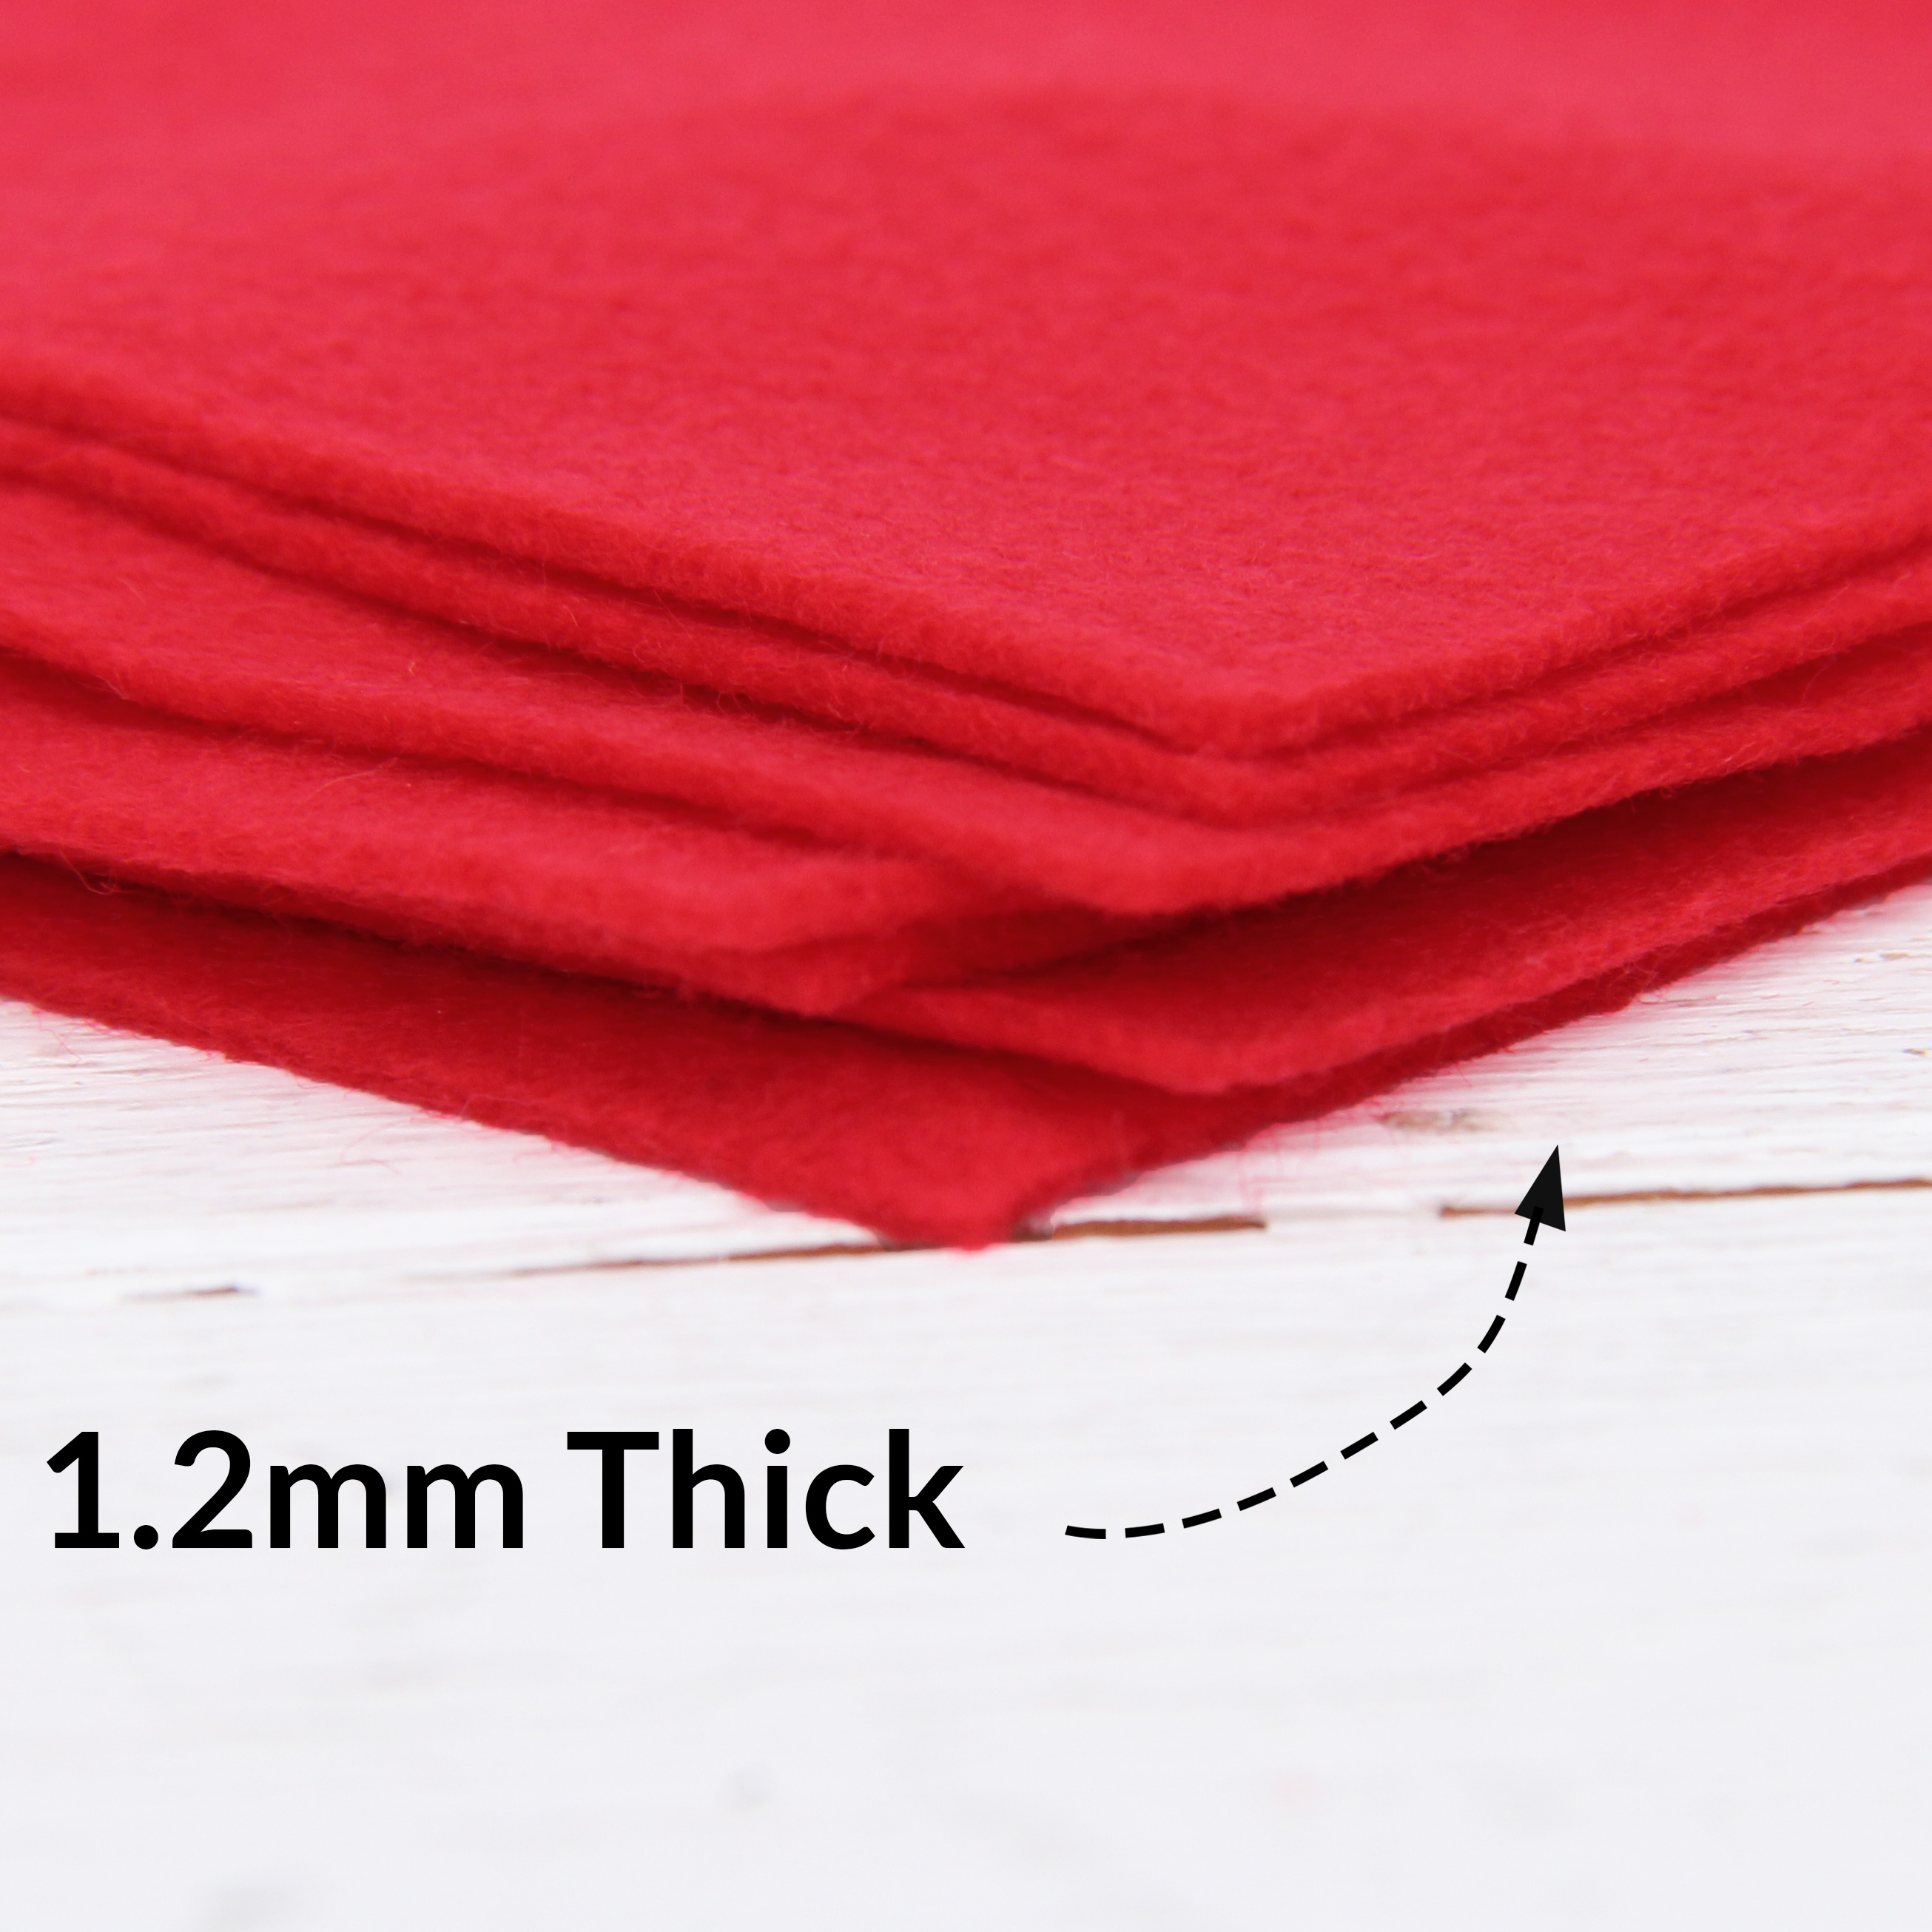 Threadart Premium Felt By the Yard - 36 Wide - Red, Soft Wool-Like Feel, 1.2mm Thick for DIY Crafts, Sewing, Crafting Projects